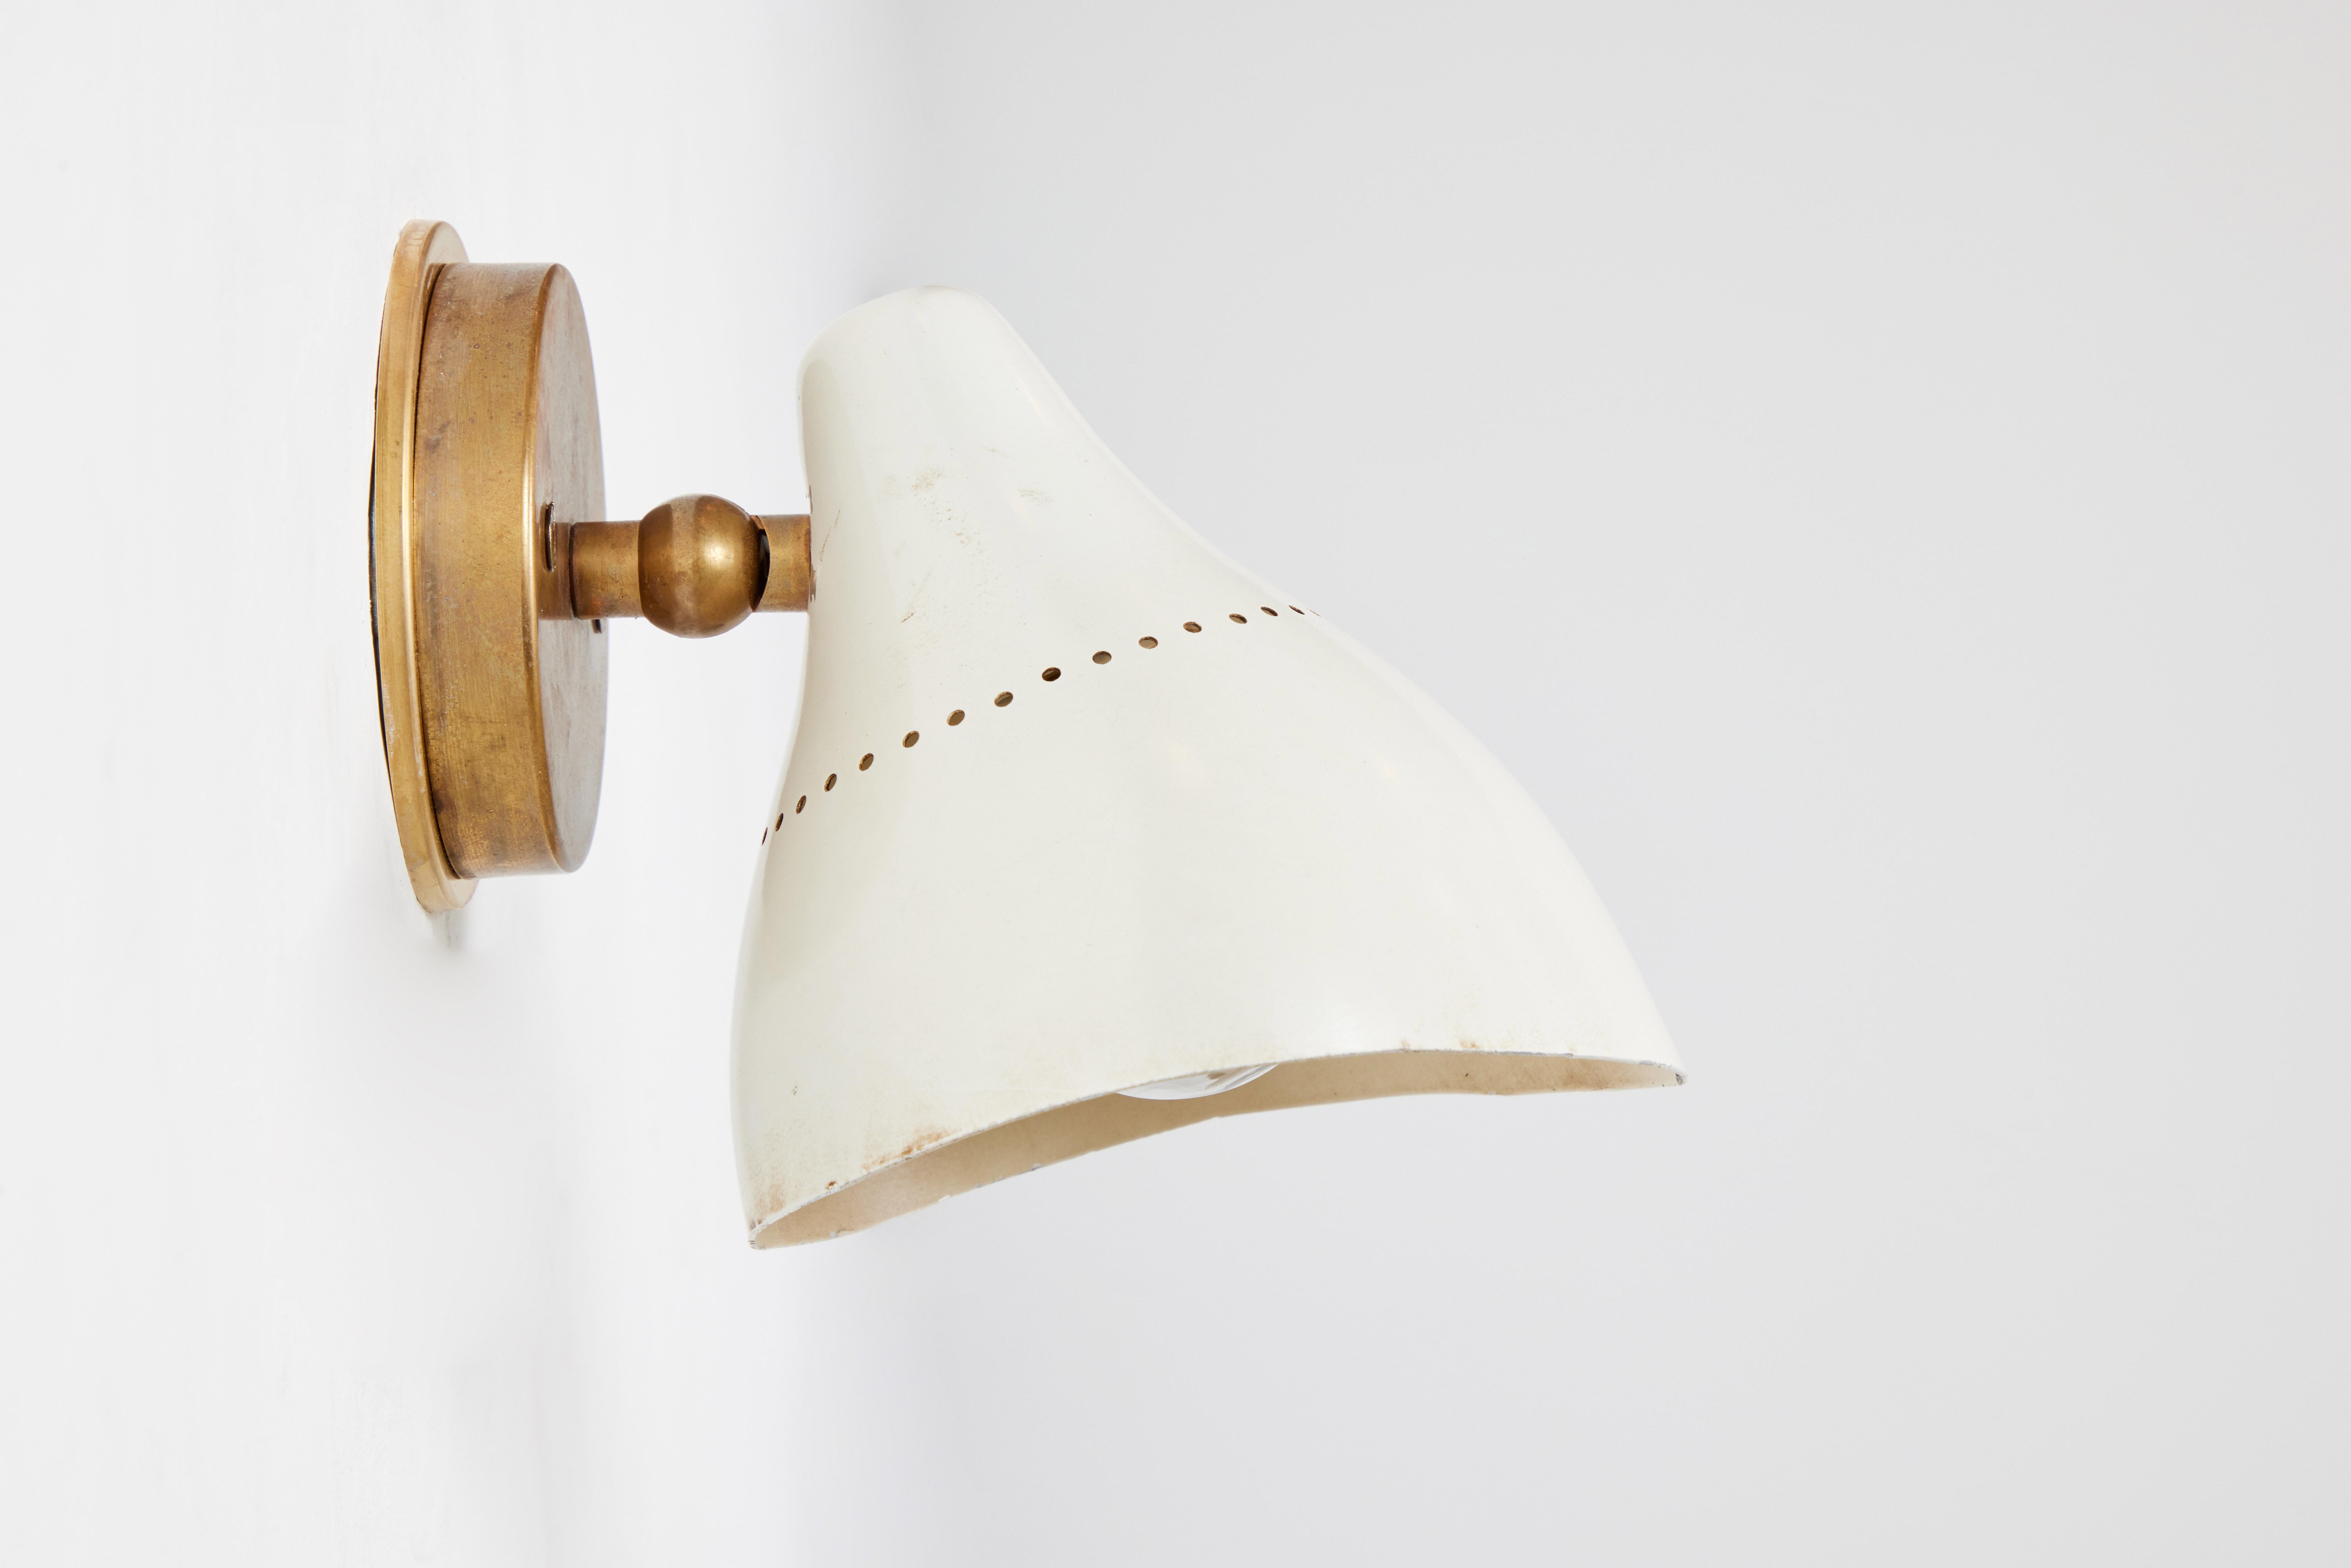 1950s white perforated metal & brass sconce by Stilnovo. Executed in white perforated metal and patinated brass with the trademark Stilnovo circular 'knuckle' jointed brass arm for up/down adjustability. A sculptural and refined design